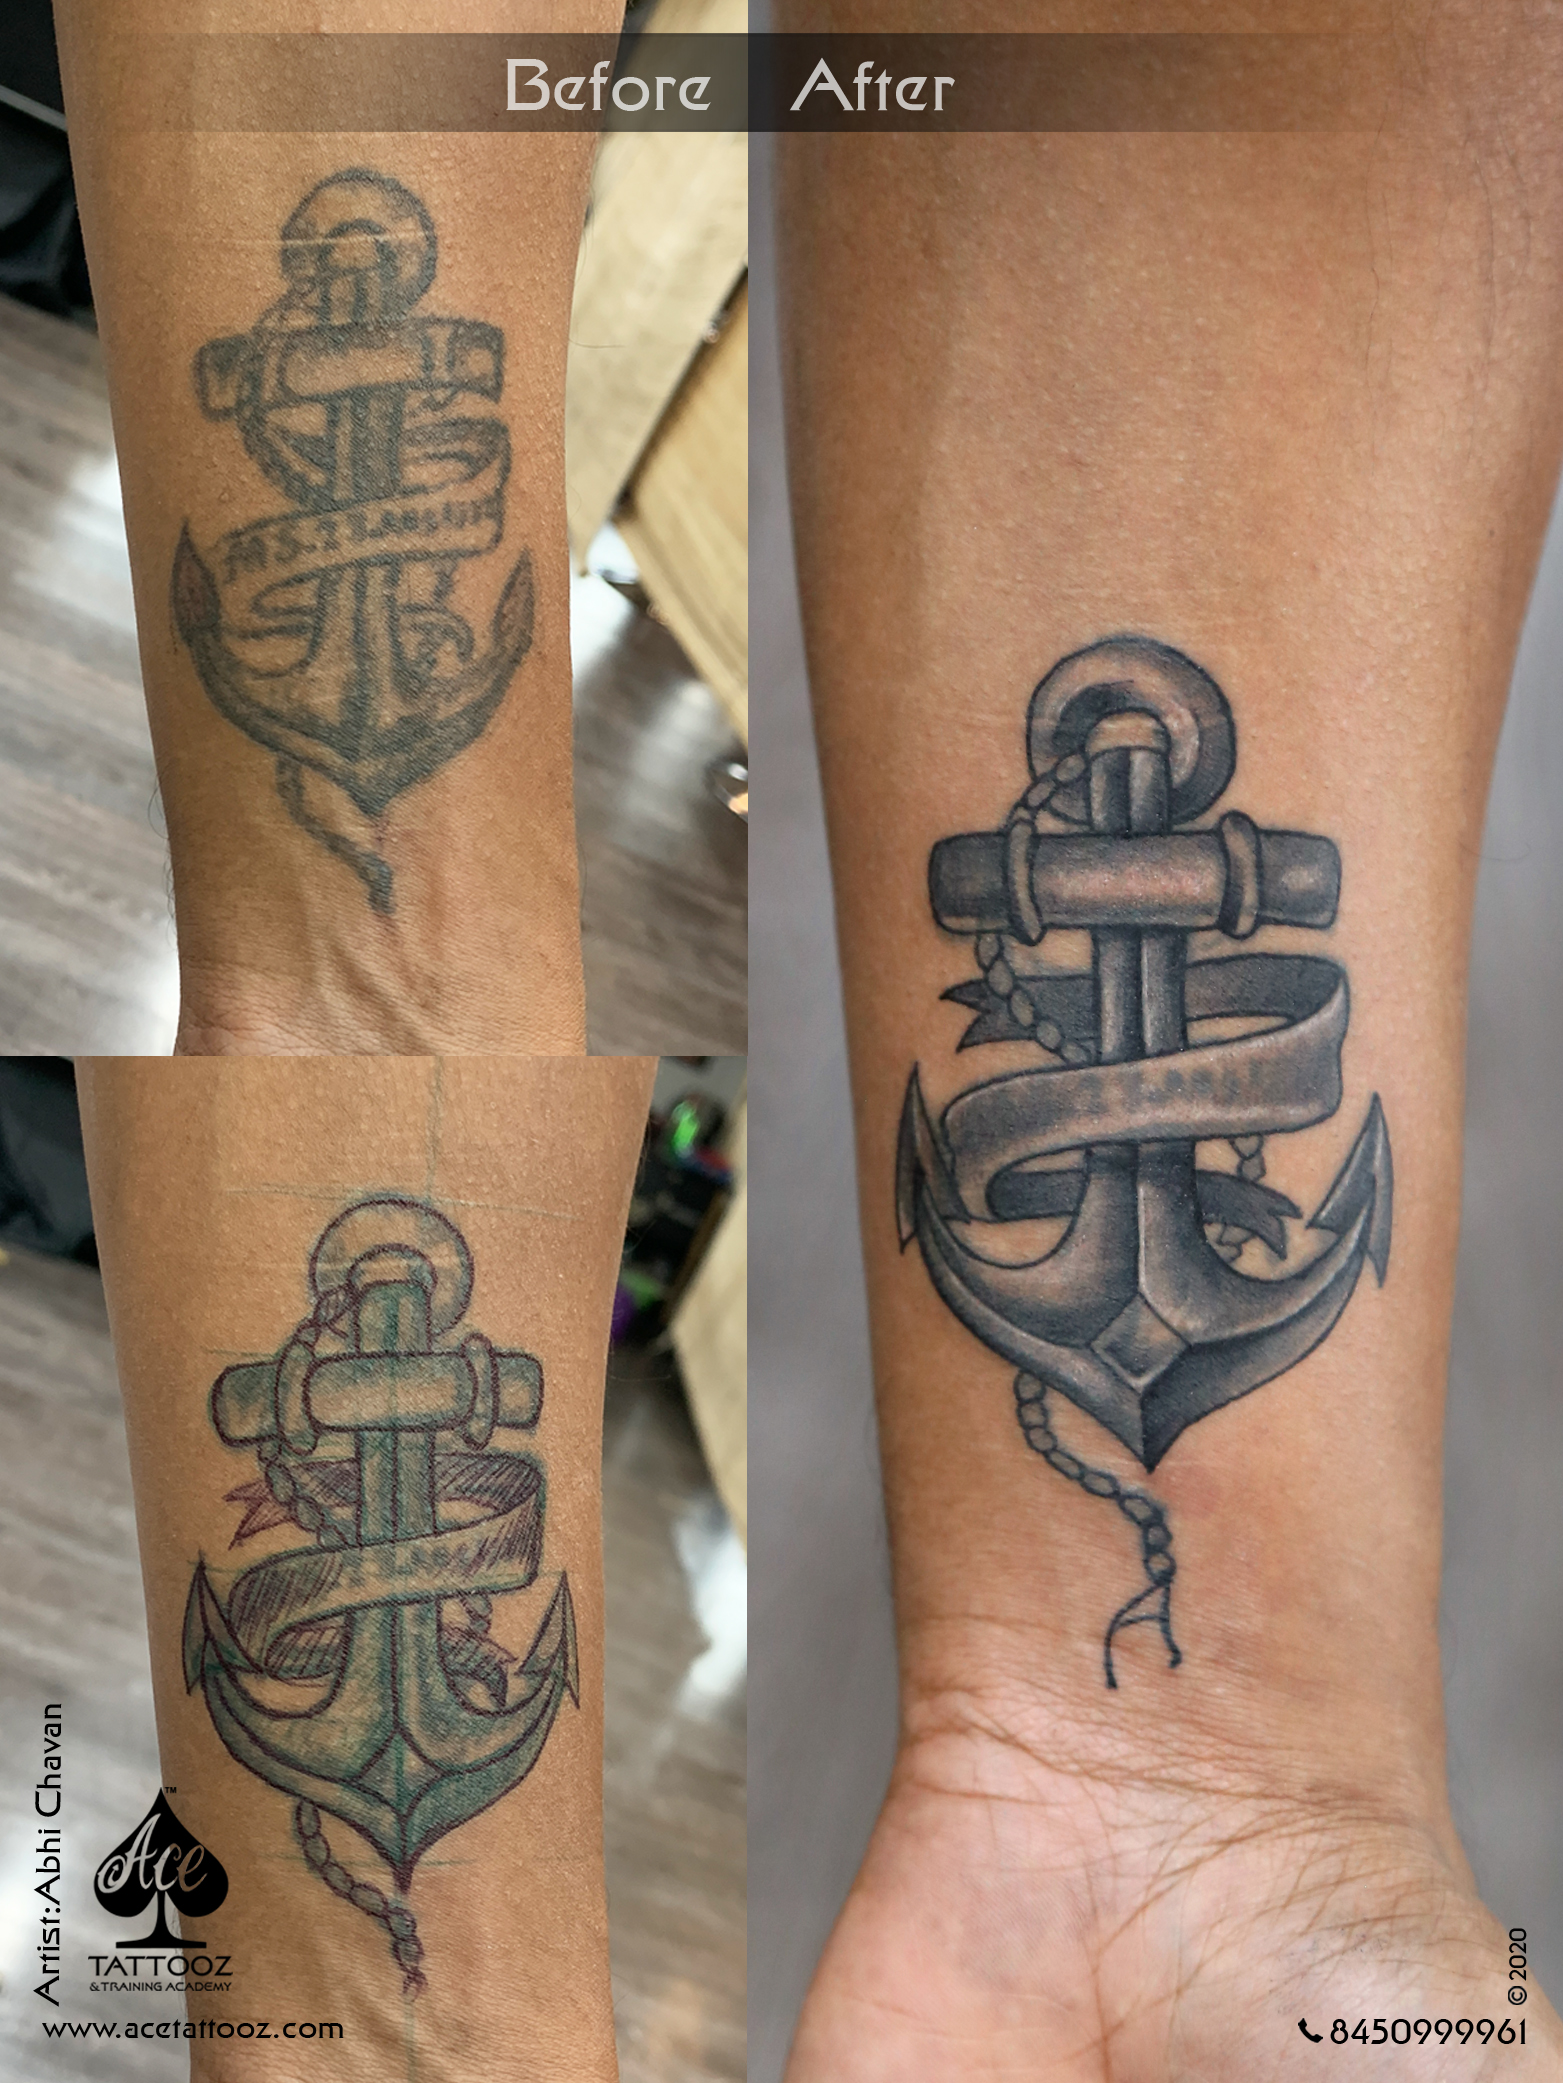 12 Coolest Anchor Tattoo Ideas To Make You Look Badass  LIFESTYLE BY PS